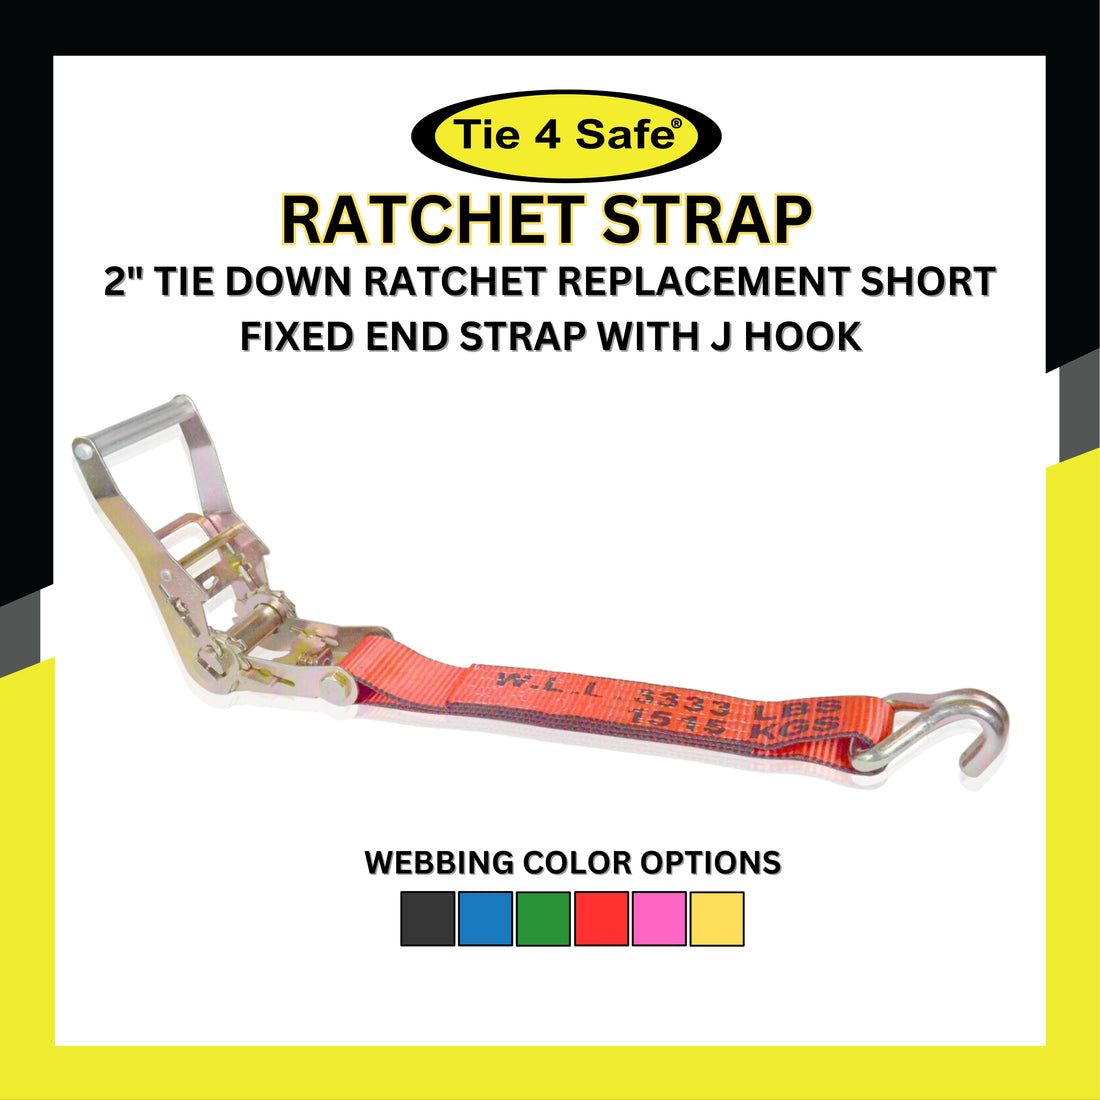 USA 2" Tie Down Ratchet Replacement Short Fixed End Strap With J Hook